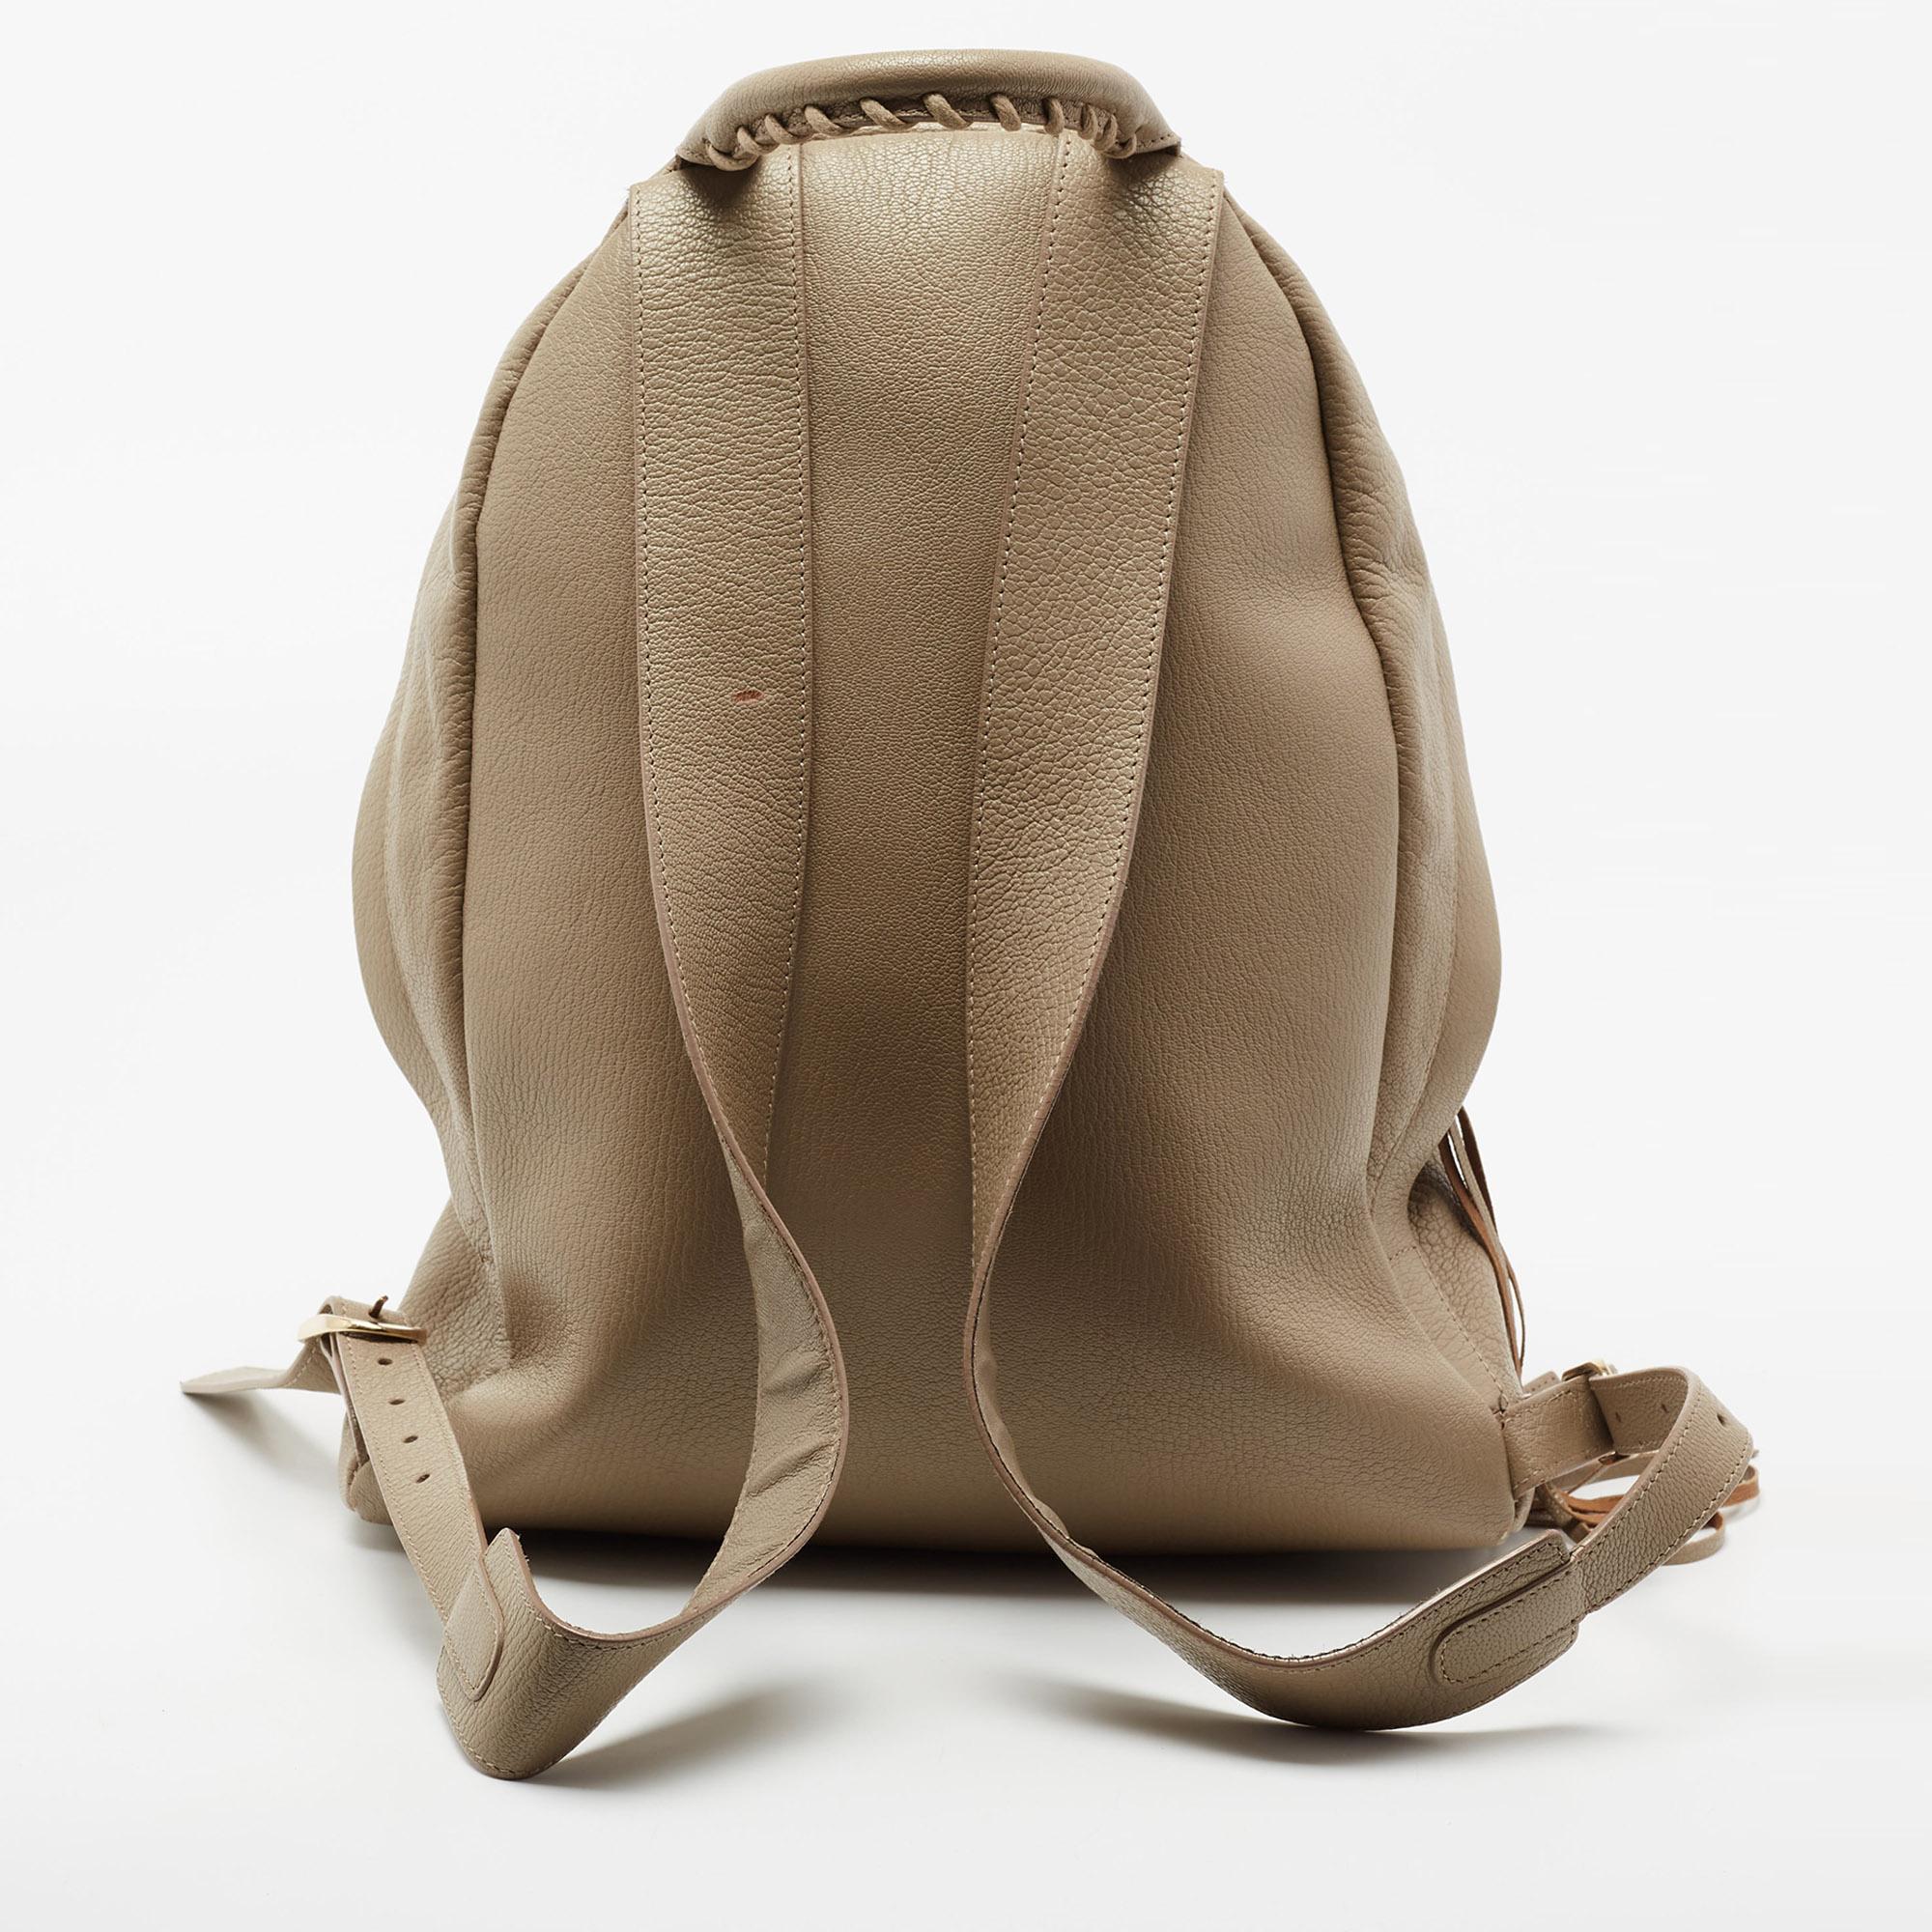 This designer backpack by Balenciaga is carefully crafted from beige leather. The zip closure reveals a spacious interior that accommodates essentials comfortably. Just the right backpack for short trips!

Includes: Mirror
